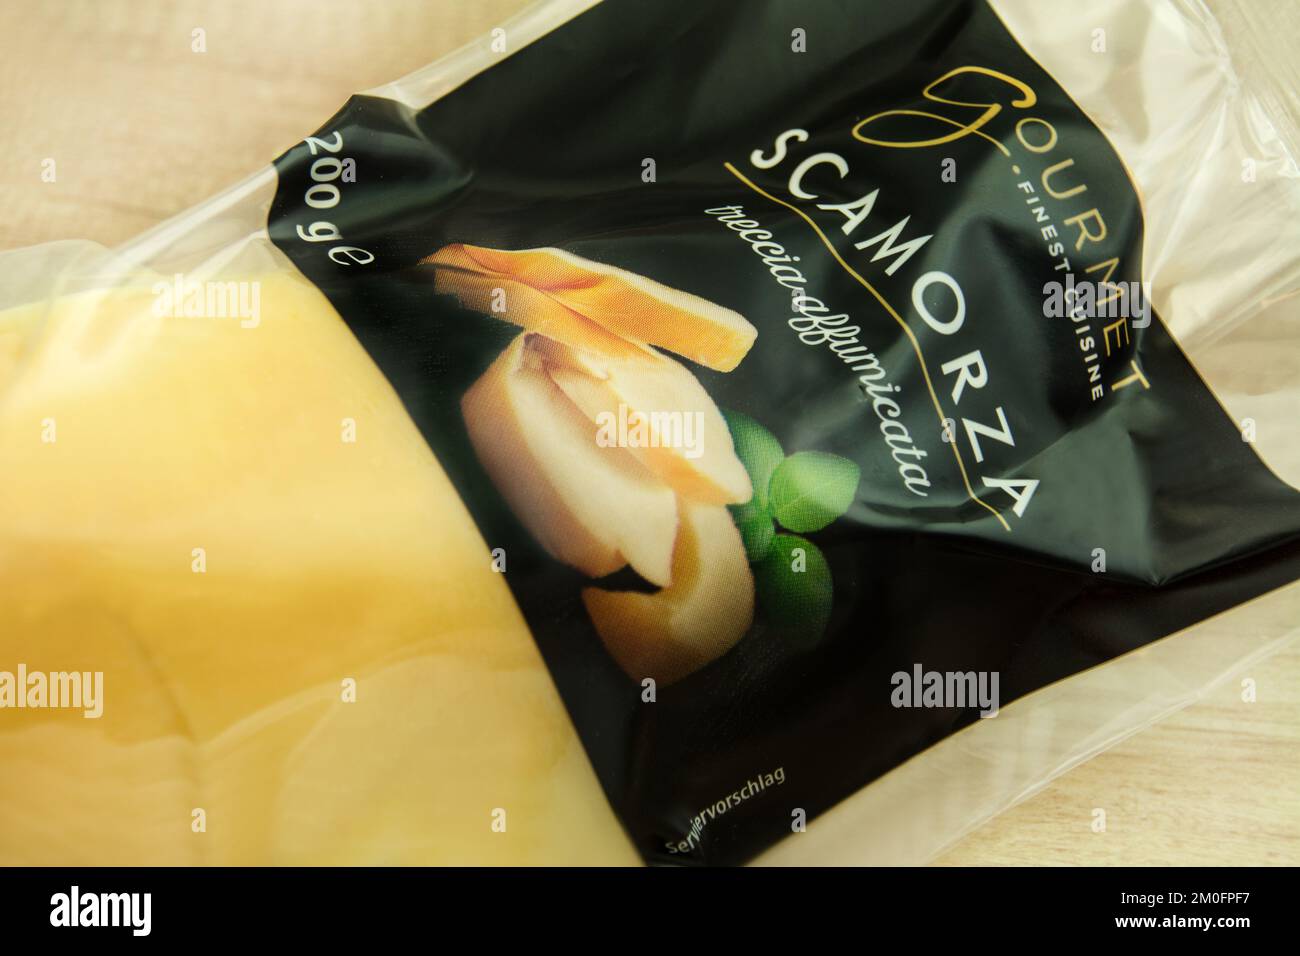 Scamorza kase hi-res stock photography and - Alamy images